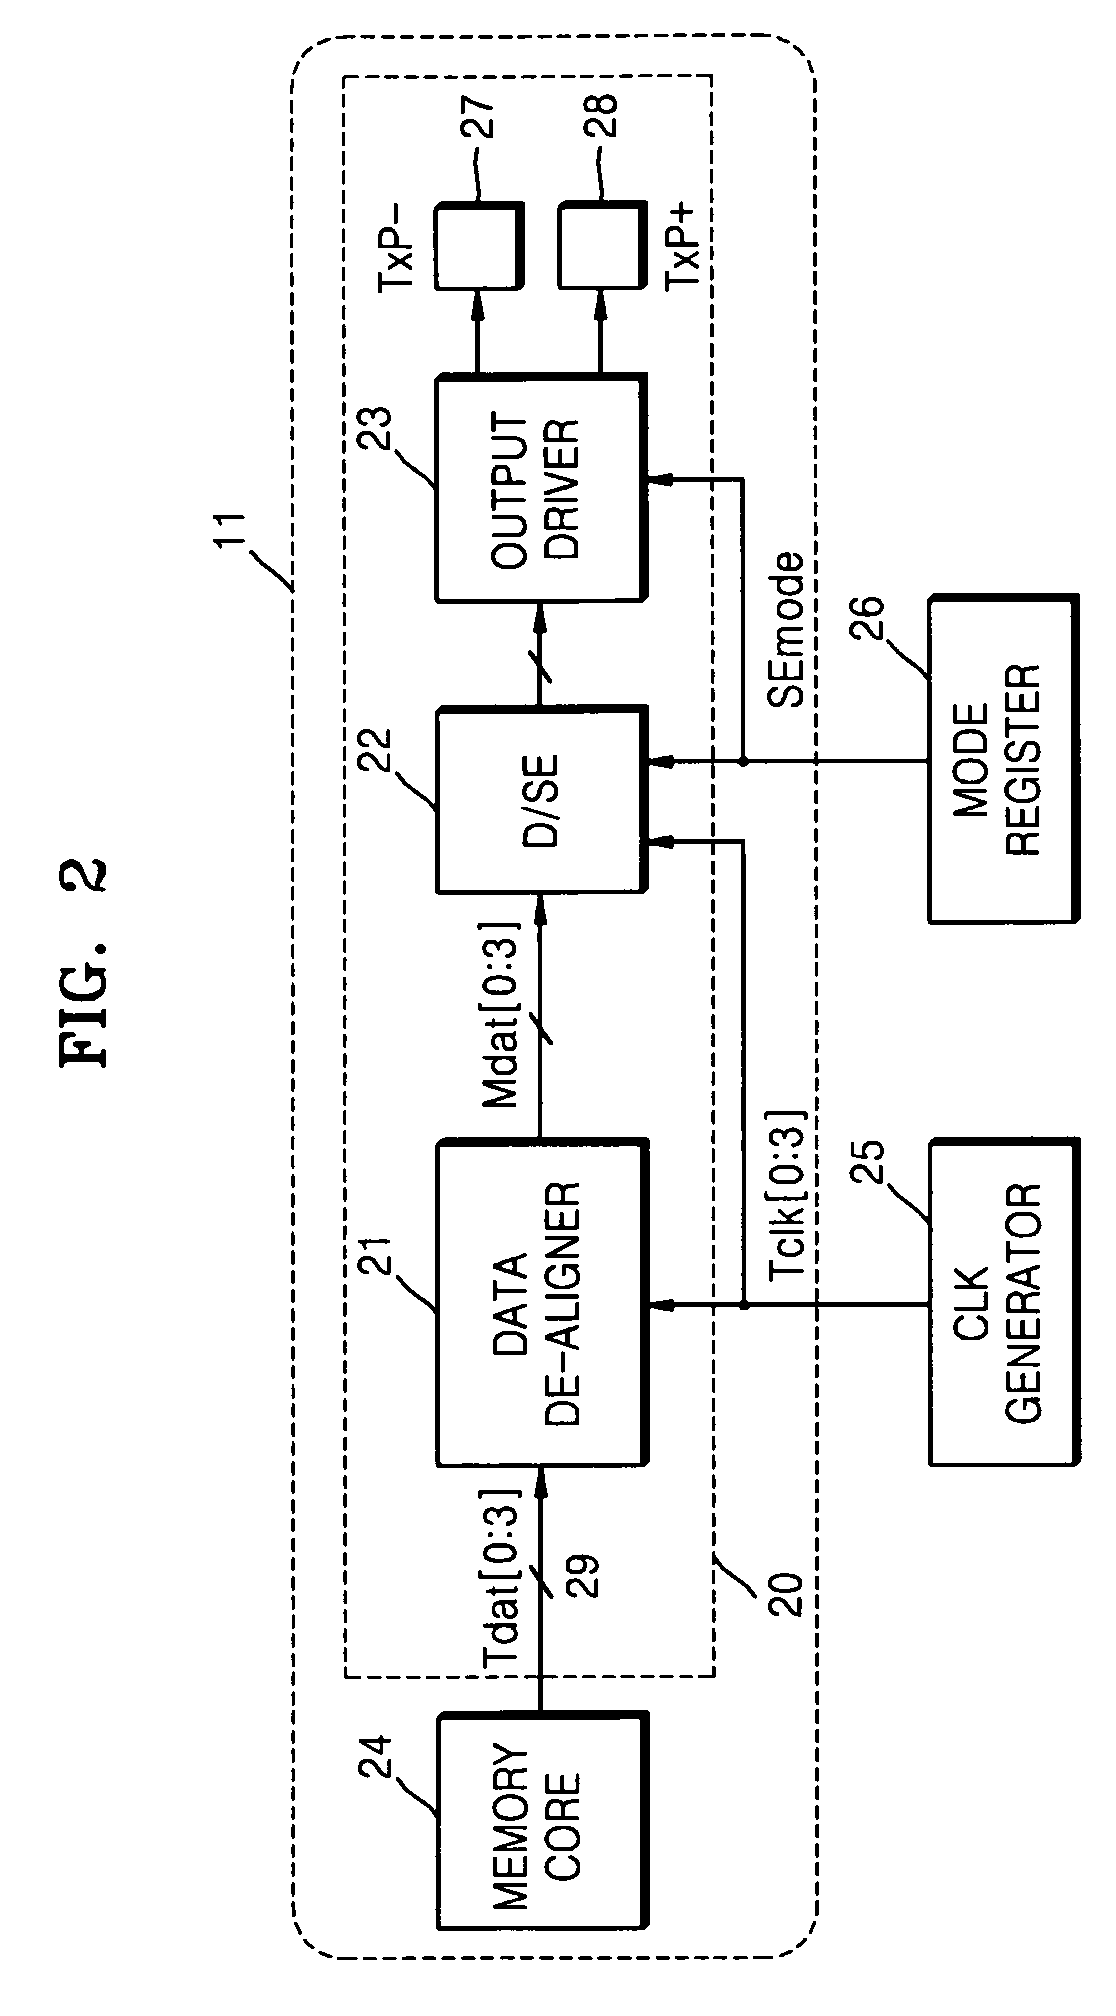 System and method for selectively performing single-ended and differential signaling